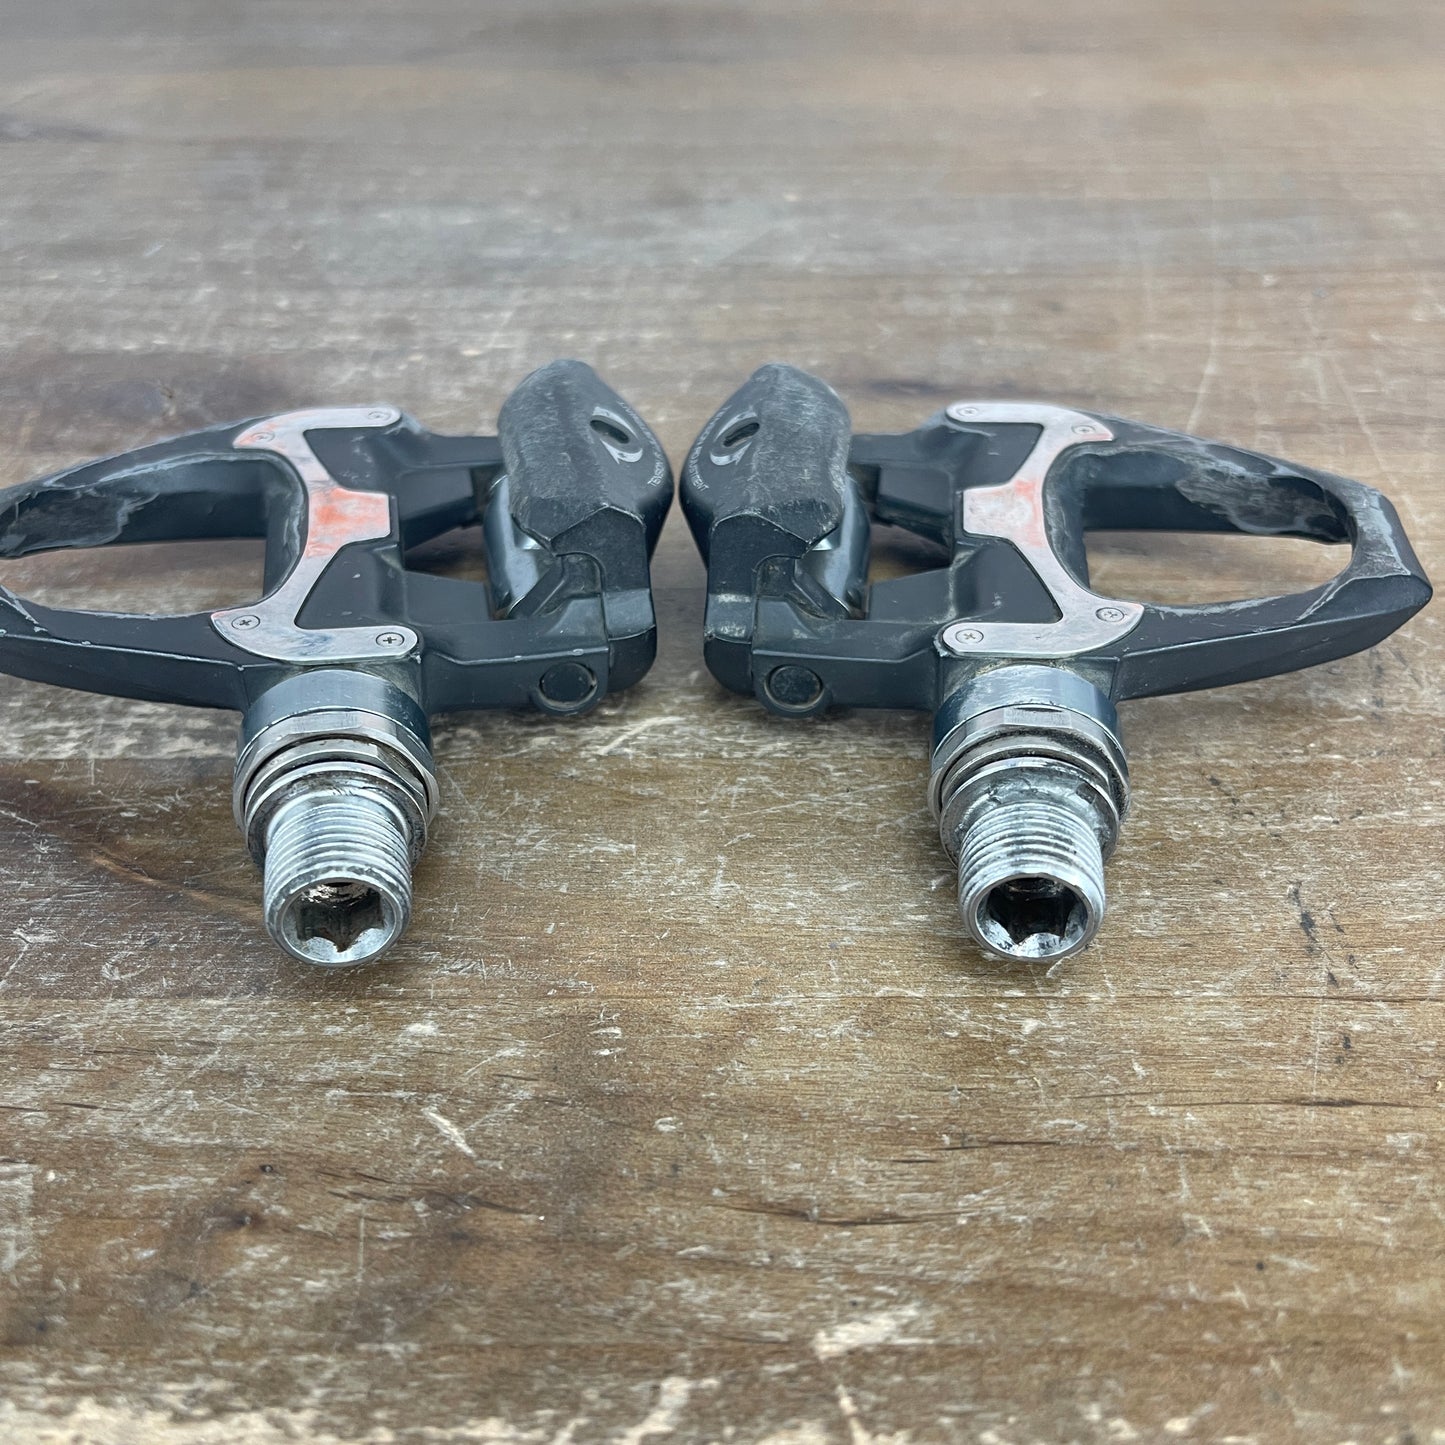 Typical Wear Shimano Dura Ace PD-7900 Carbon Road Bike Clipless Pedals 250g